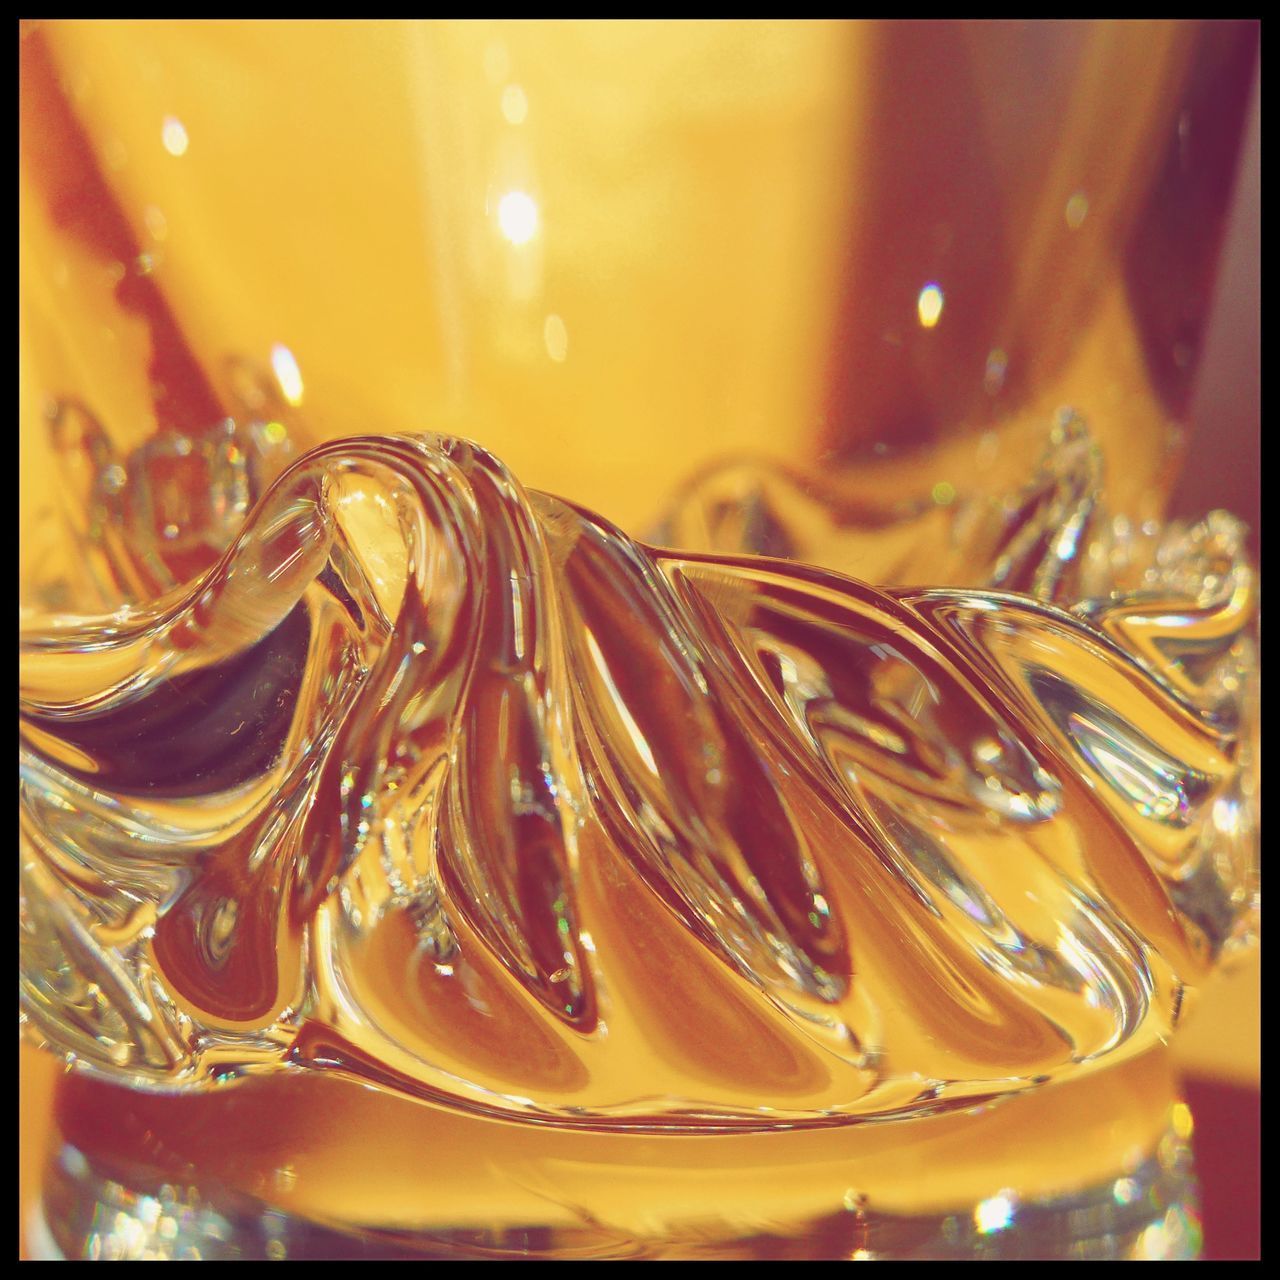 CLOSE-UP OF DRINK ON GLASS TABLE